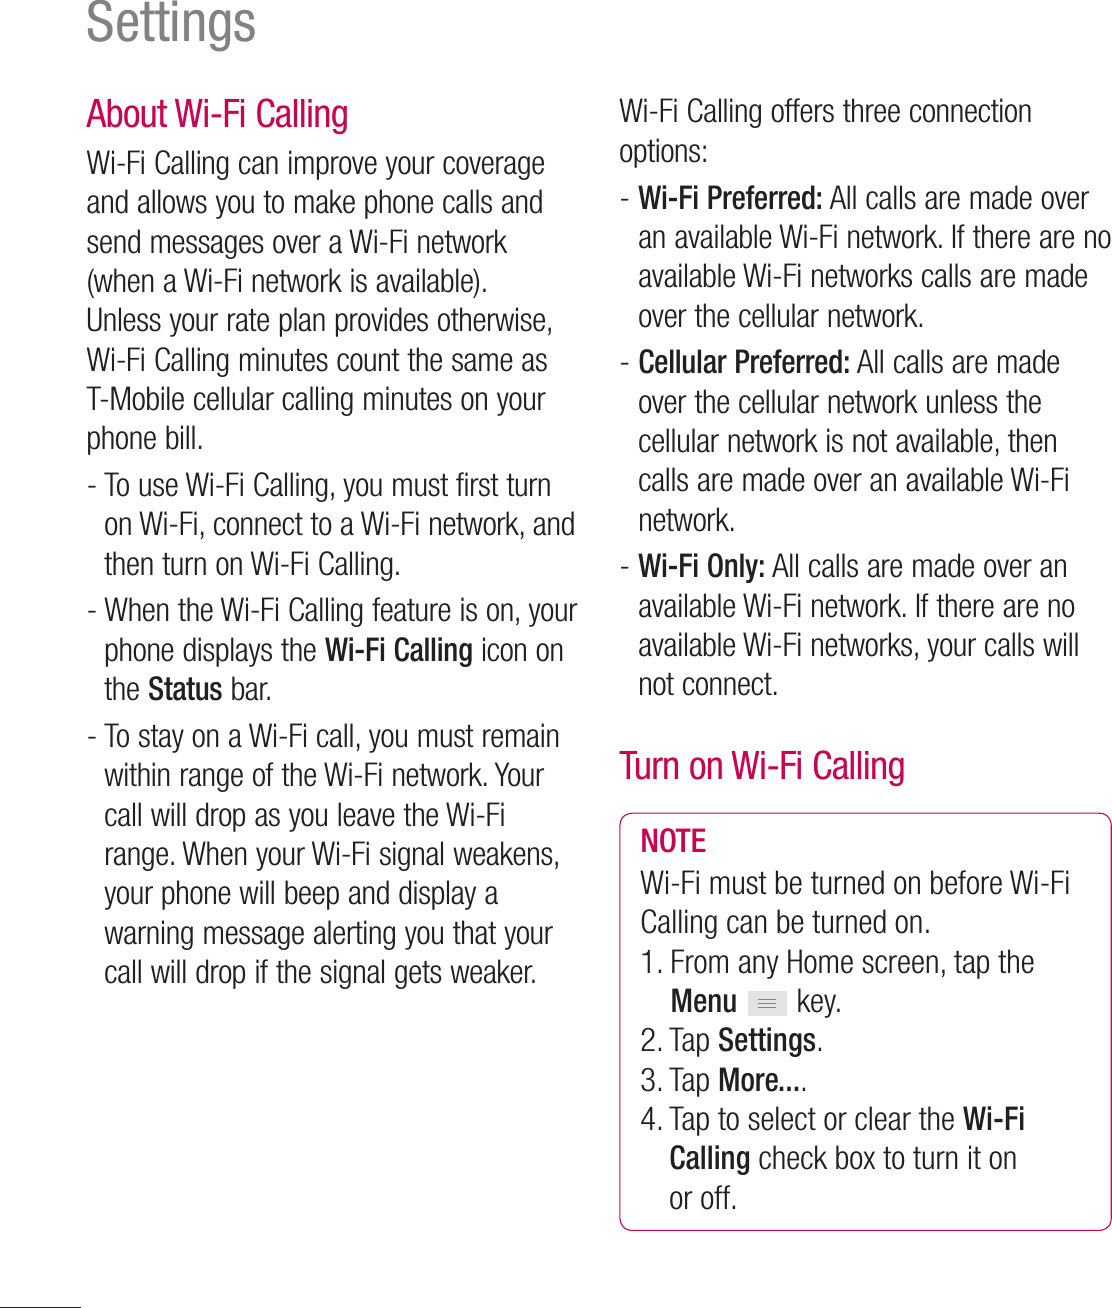 106SettingsAbout Wi-Fi Calling Wi-Fi Calling can improve your coverage and allows you to make phone calls and send messages over a Wi-Fi network (when a Wi-Fi network is available). Unless your rate plan provides otherwise, Wi-Fi Calling minutes count the same as T-Mobile cellular calling minutes on your phone bill.-  To use Wi-Fi Calling, you must first turn on Wi-Fi, connect to a Wi-Fi network, and then turn on Wi-Fi Calling.-  When the Wi-Fi Calling feature is on, your phone displays the Wi-Fi Calling icon on the Status bar.-  To stay on a Wi-Fi call, you must remain within range of the Wi-Fi network. Your call will drop as you leave the Wi-Fi range. When your Wi-Fi signal weakens, your phone will beep and display a warning message alerting you that your call will drop if the signal gets weaker.Wi-Fi Calling offers three connection options:-  Wi-Fi Preferred: All calls are made over an available Wi-Fi network. If there are no available Wi-Fi networks calls are made over the cellular network.-  Cellular Preferred: All calls are made over the cellular network unless the cellular network is not available, then calls are made over an available Wi-Fi network.-  Wi-Fi Only: All calls are made over an available Wi-Fi network. If there are no available Wi-Fi networks, your calls will not connect.Turn on Wi-Fi CallingNOTEWi-Fi must be turned on before Wi-Fi Calling can be turned on.1.  From any Home screen, tap the Menu  key.2. Tap Settings.3. Tap More....4.  Tap to select or clear the Wi-Fi Calling check box to turn it on or off.